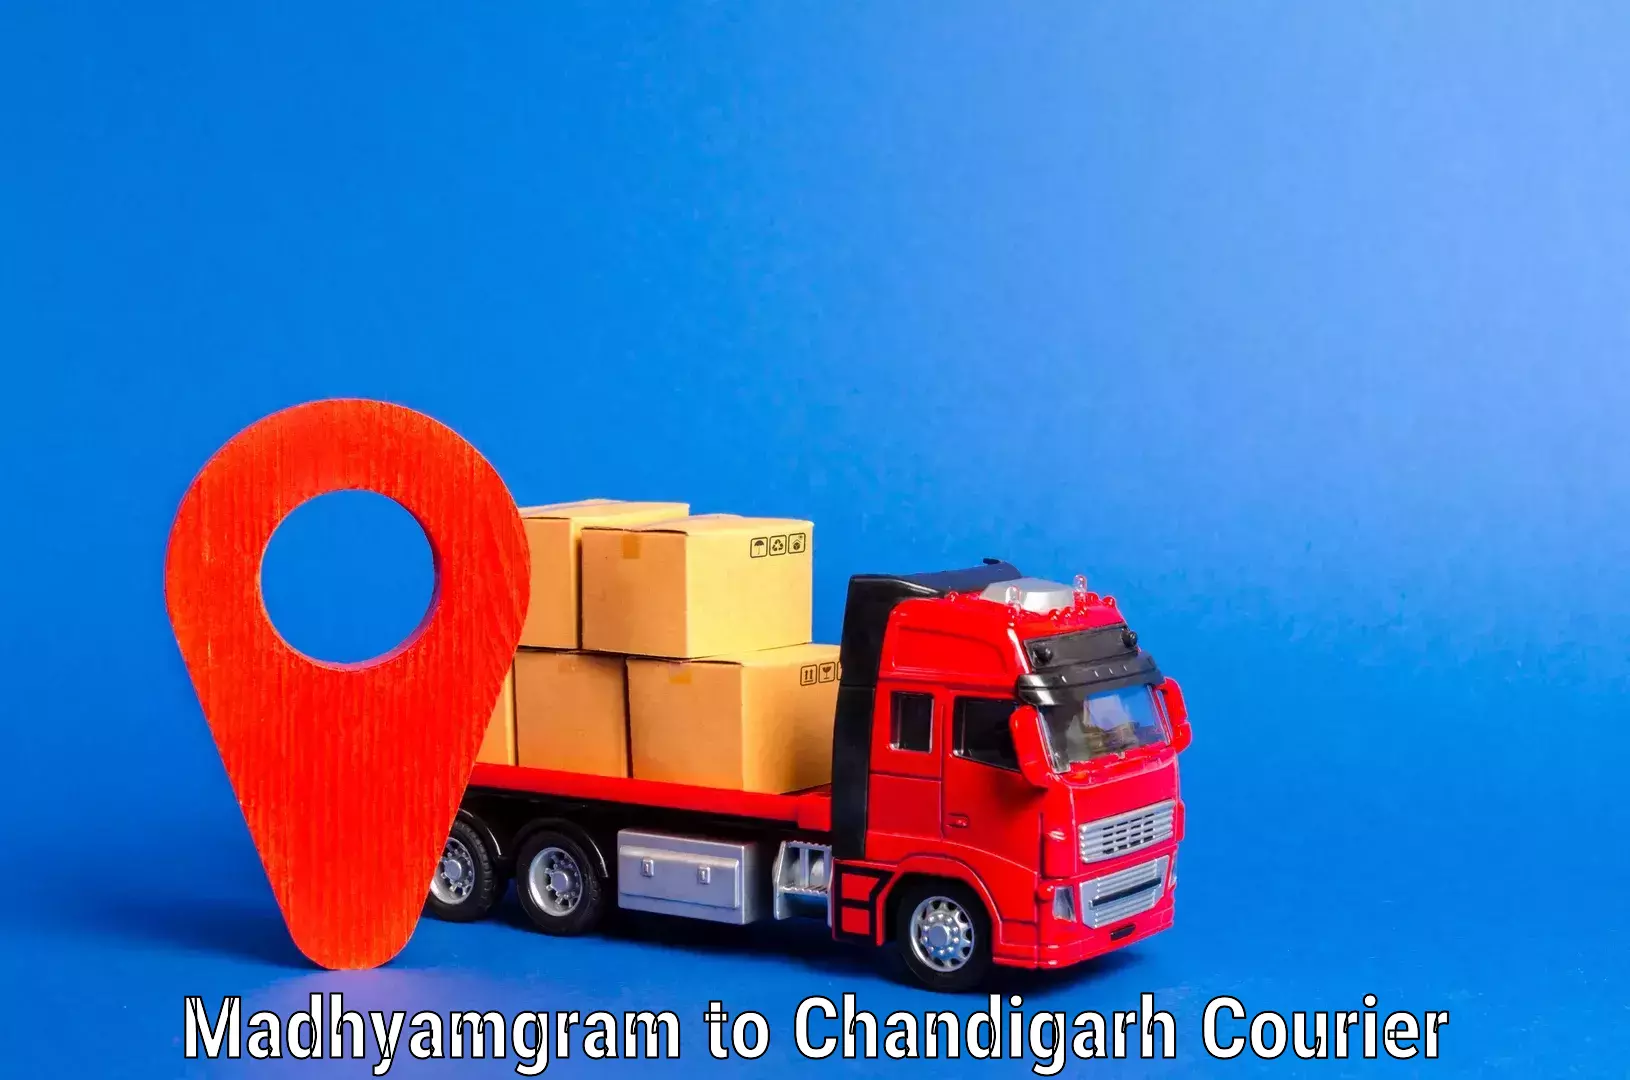 Quality moving and storage Madhyamgram to Chandigarh